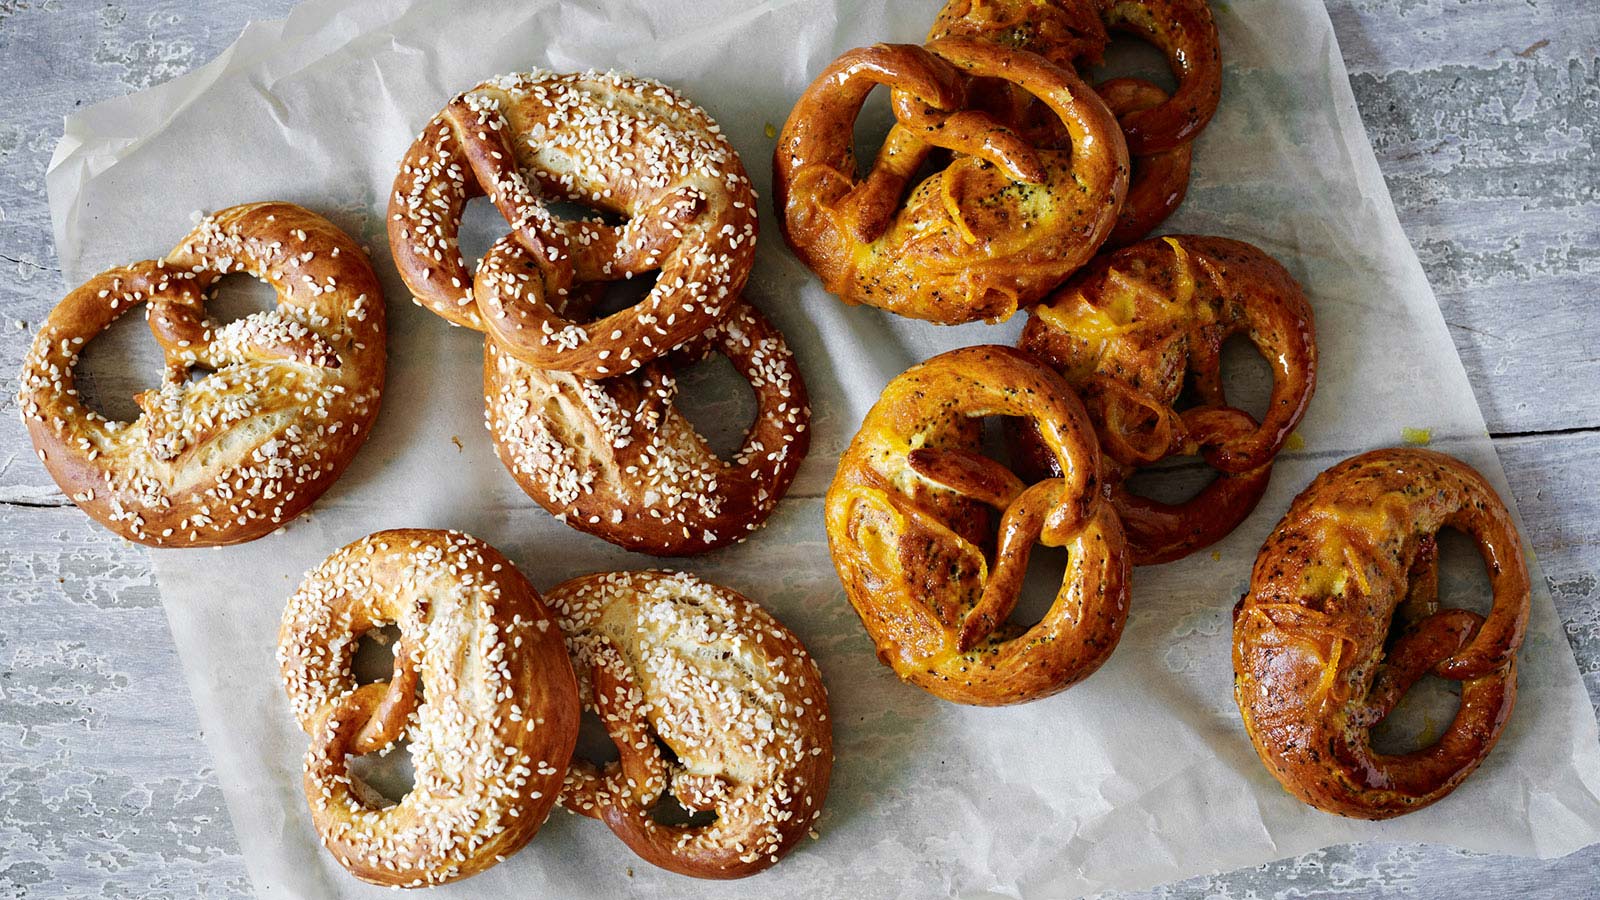 🍰 Only a Baked Good Connoisseur Will Have Eaten at Least 20/39 of These Foods Pretzels